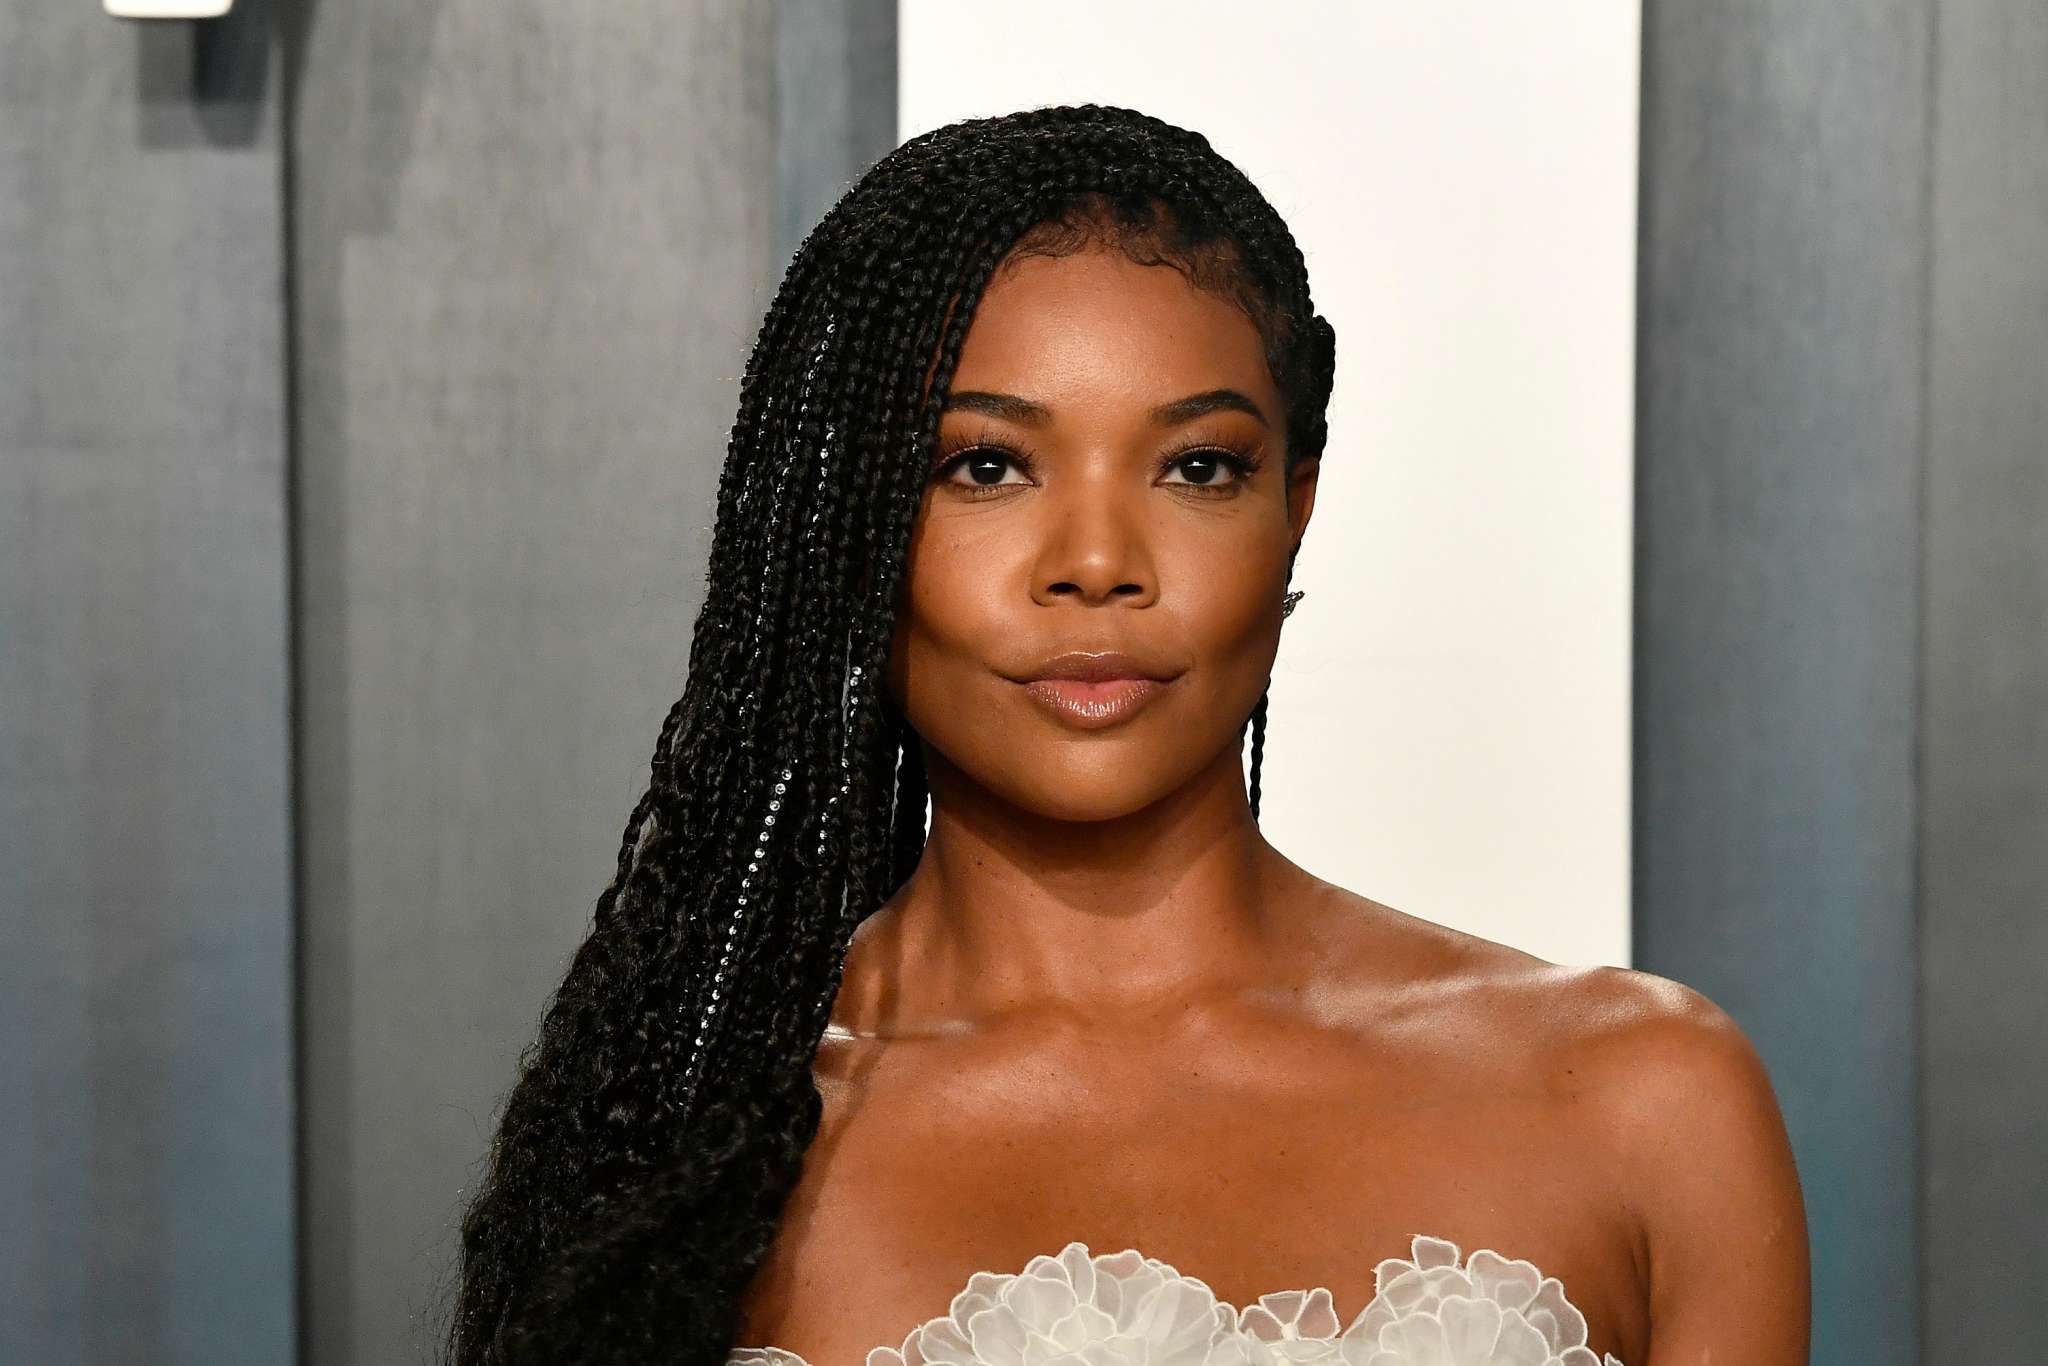 ”gabrielle-union-is-praising-joanna-noelle-levesque-see-the-clip-she-shared”